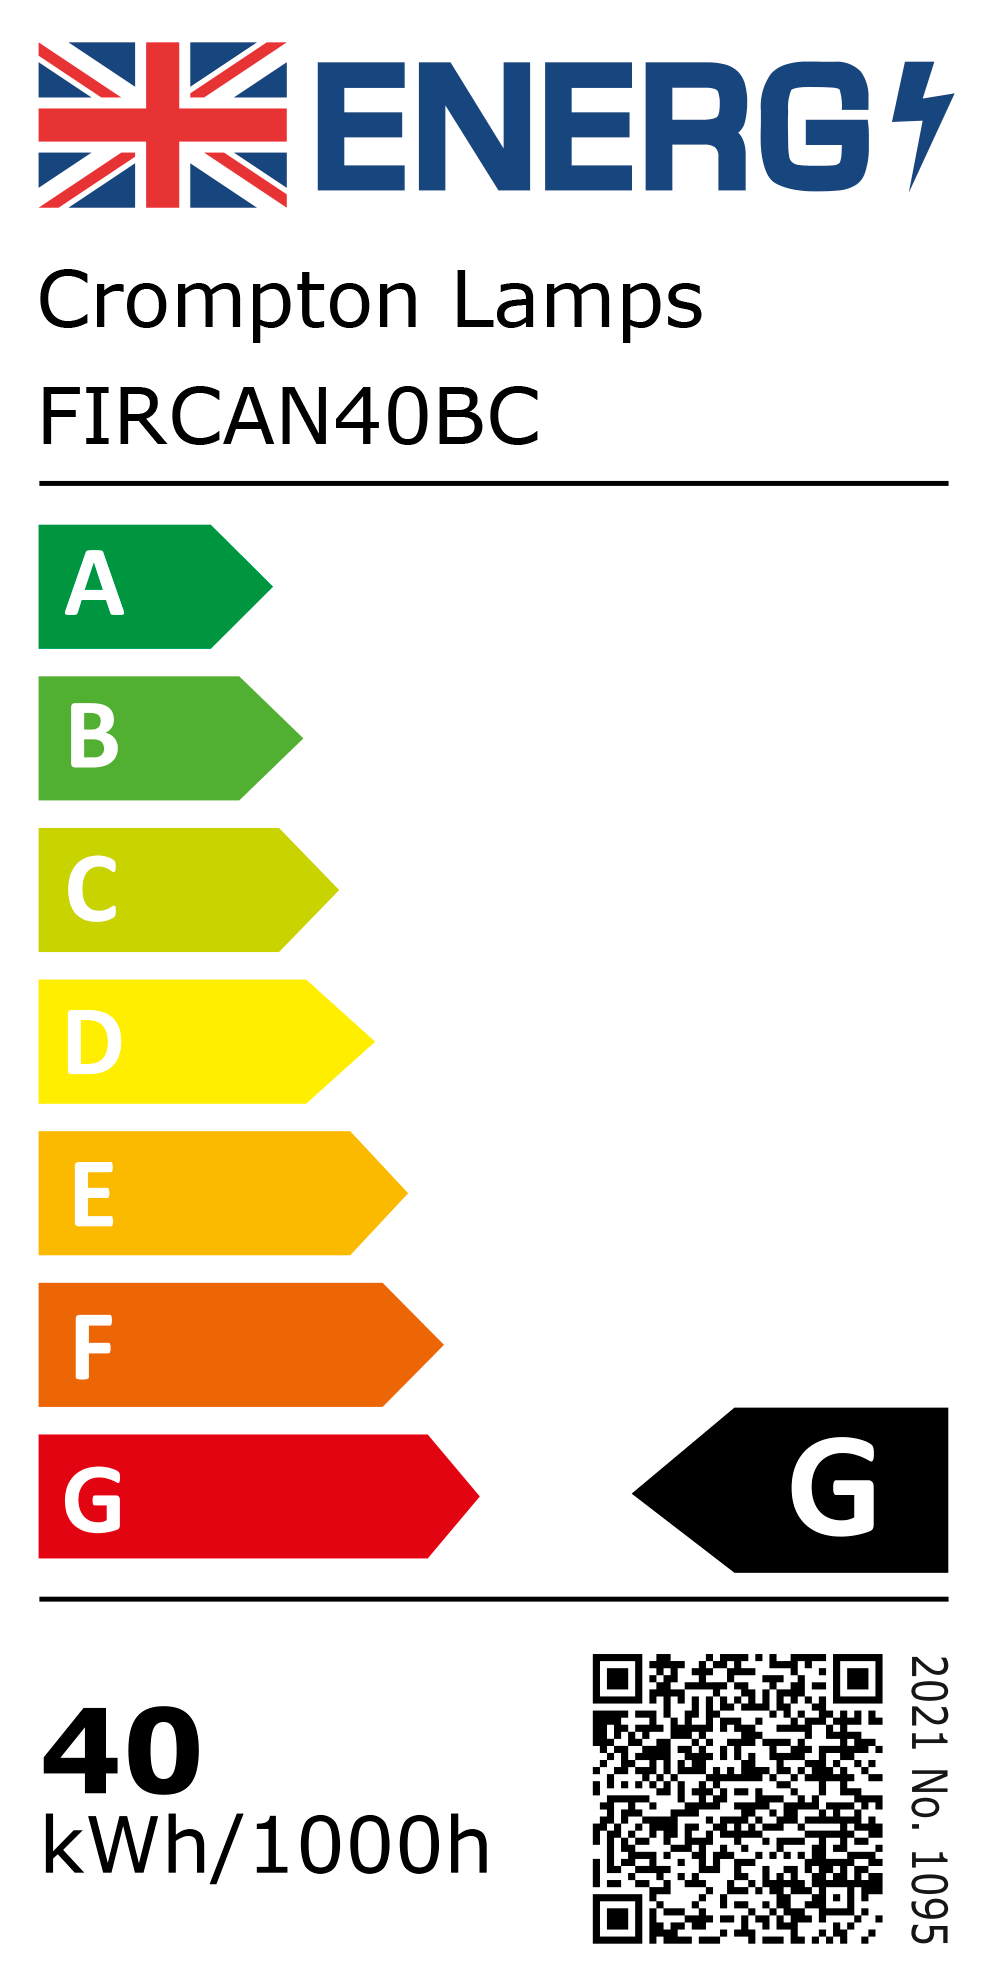 New 2021 Energy Rating Label: Stock Code FIRCAN40BC